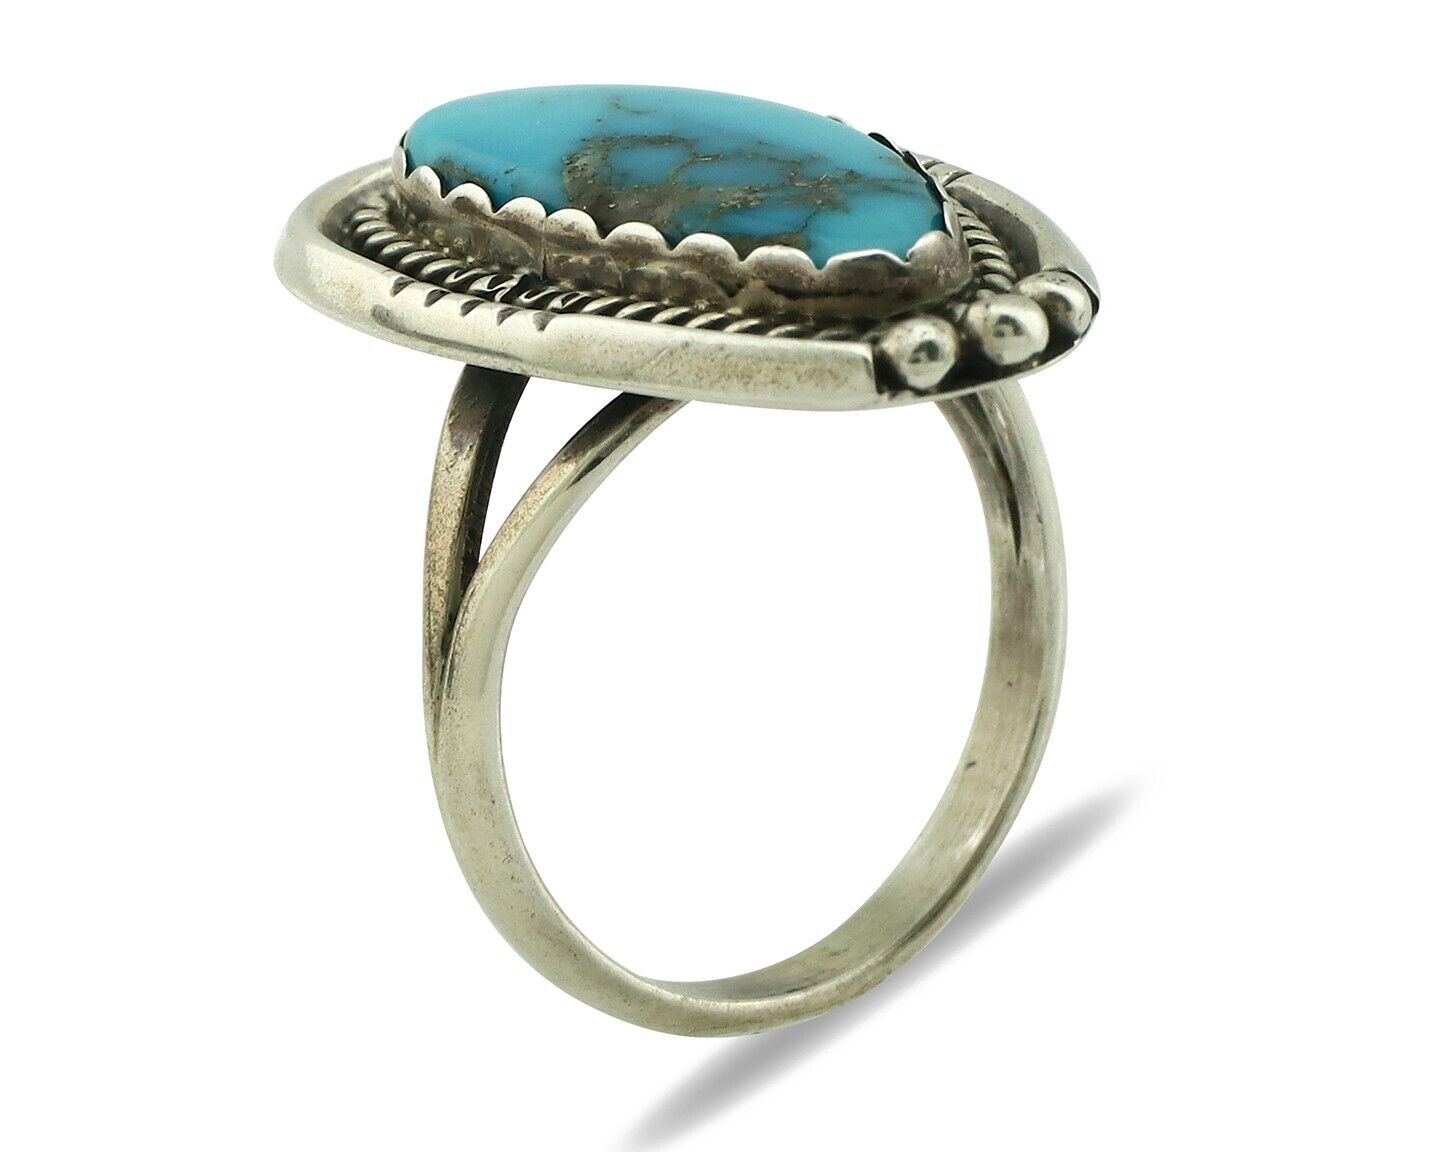 Navajo Ring 925 Silver Morenci Turquoise Native American Artist C.80's